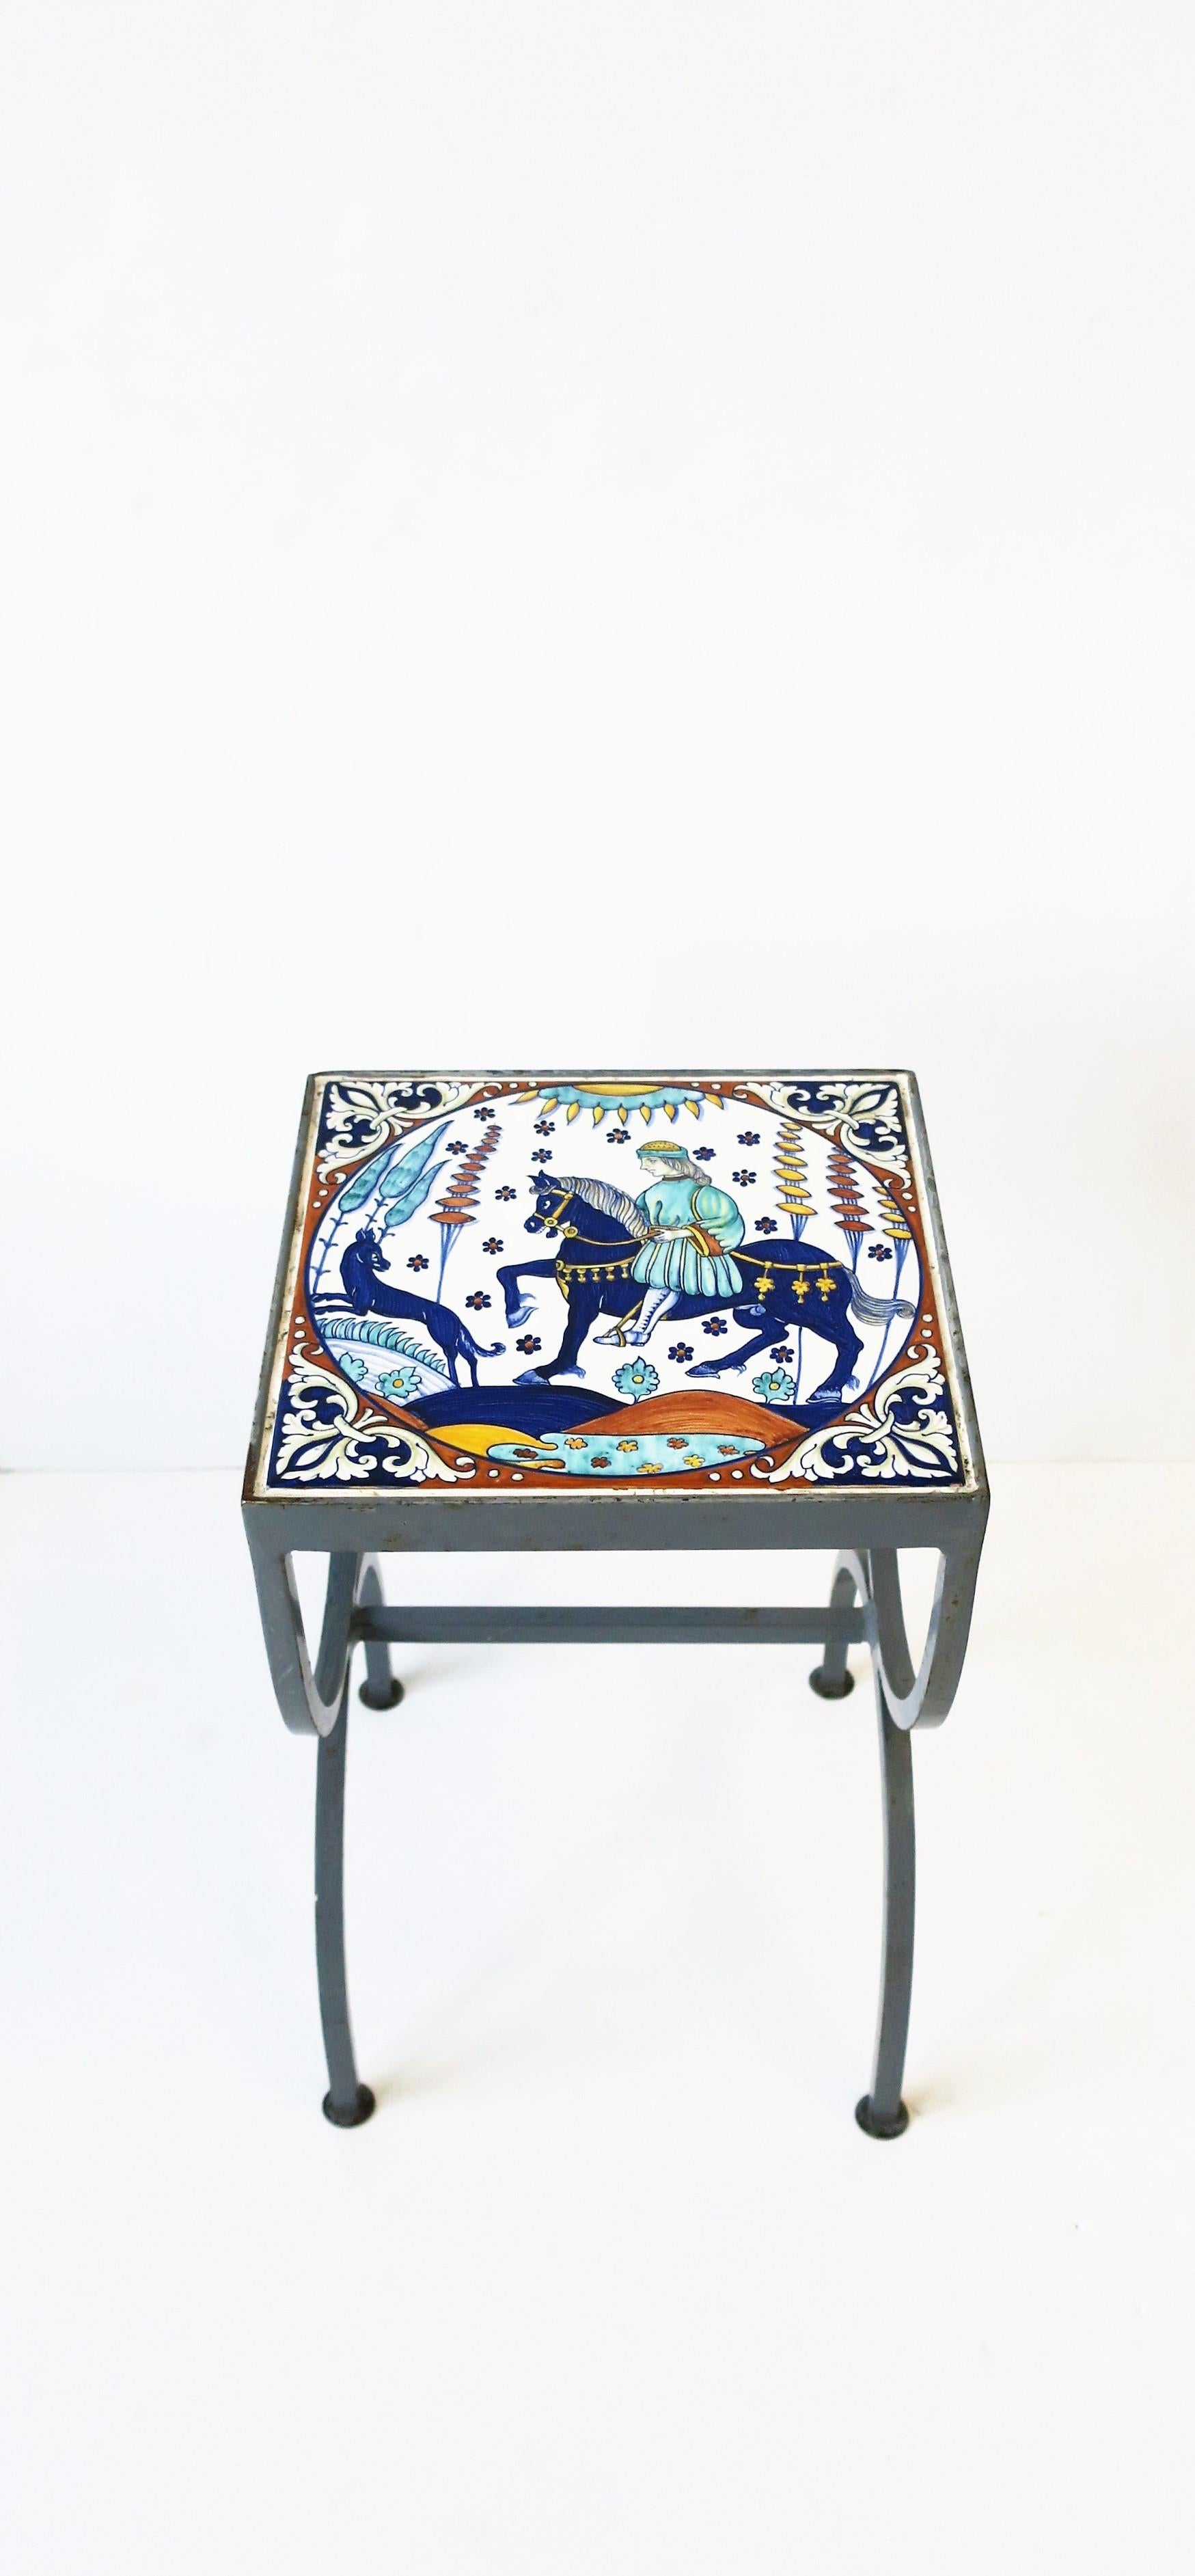 Glazed Tile Top Grey Metal Side or Drinks Table Indoors or Patio in the style of Hermes